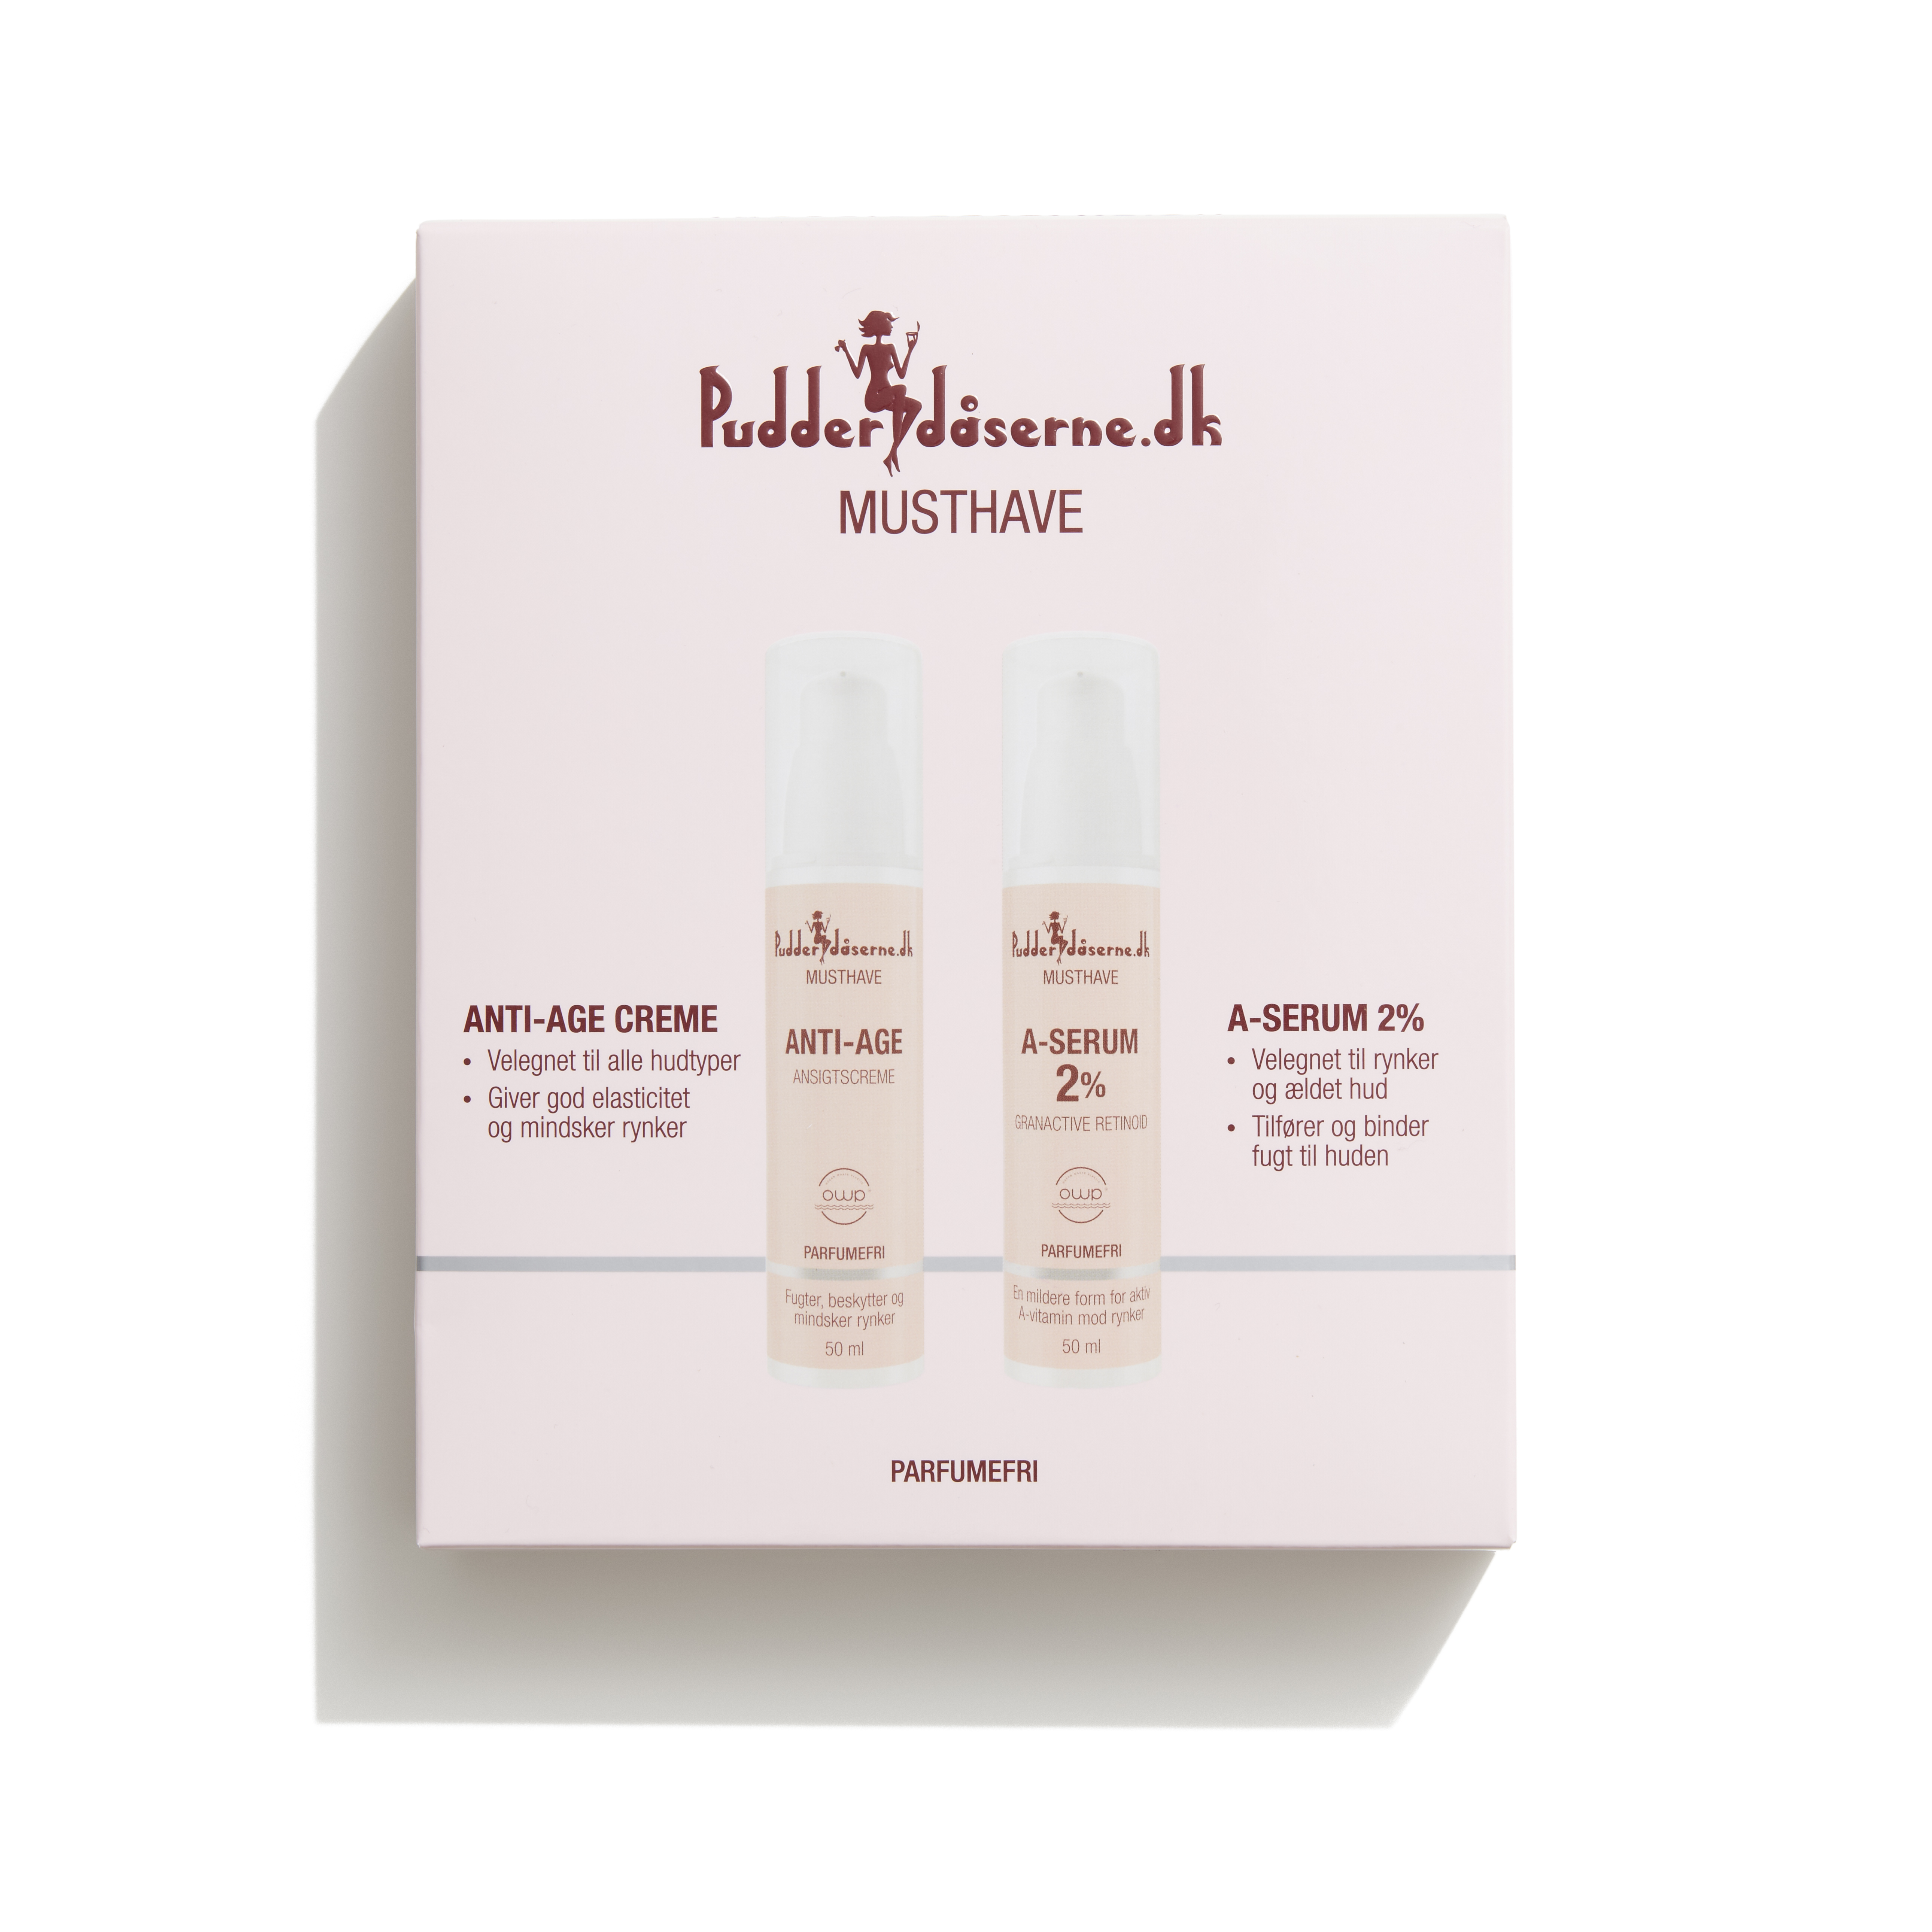 Pudderdåserne - MUST HAVE To Wrinkles, Pigment Spots & Crow's Feet ​